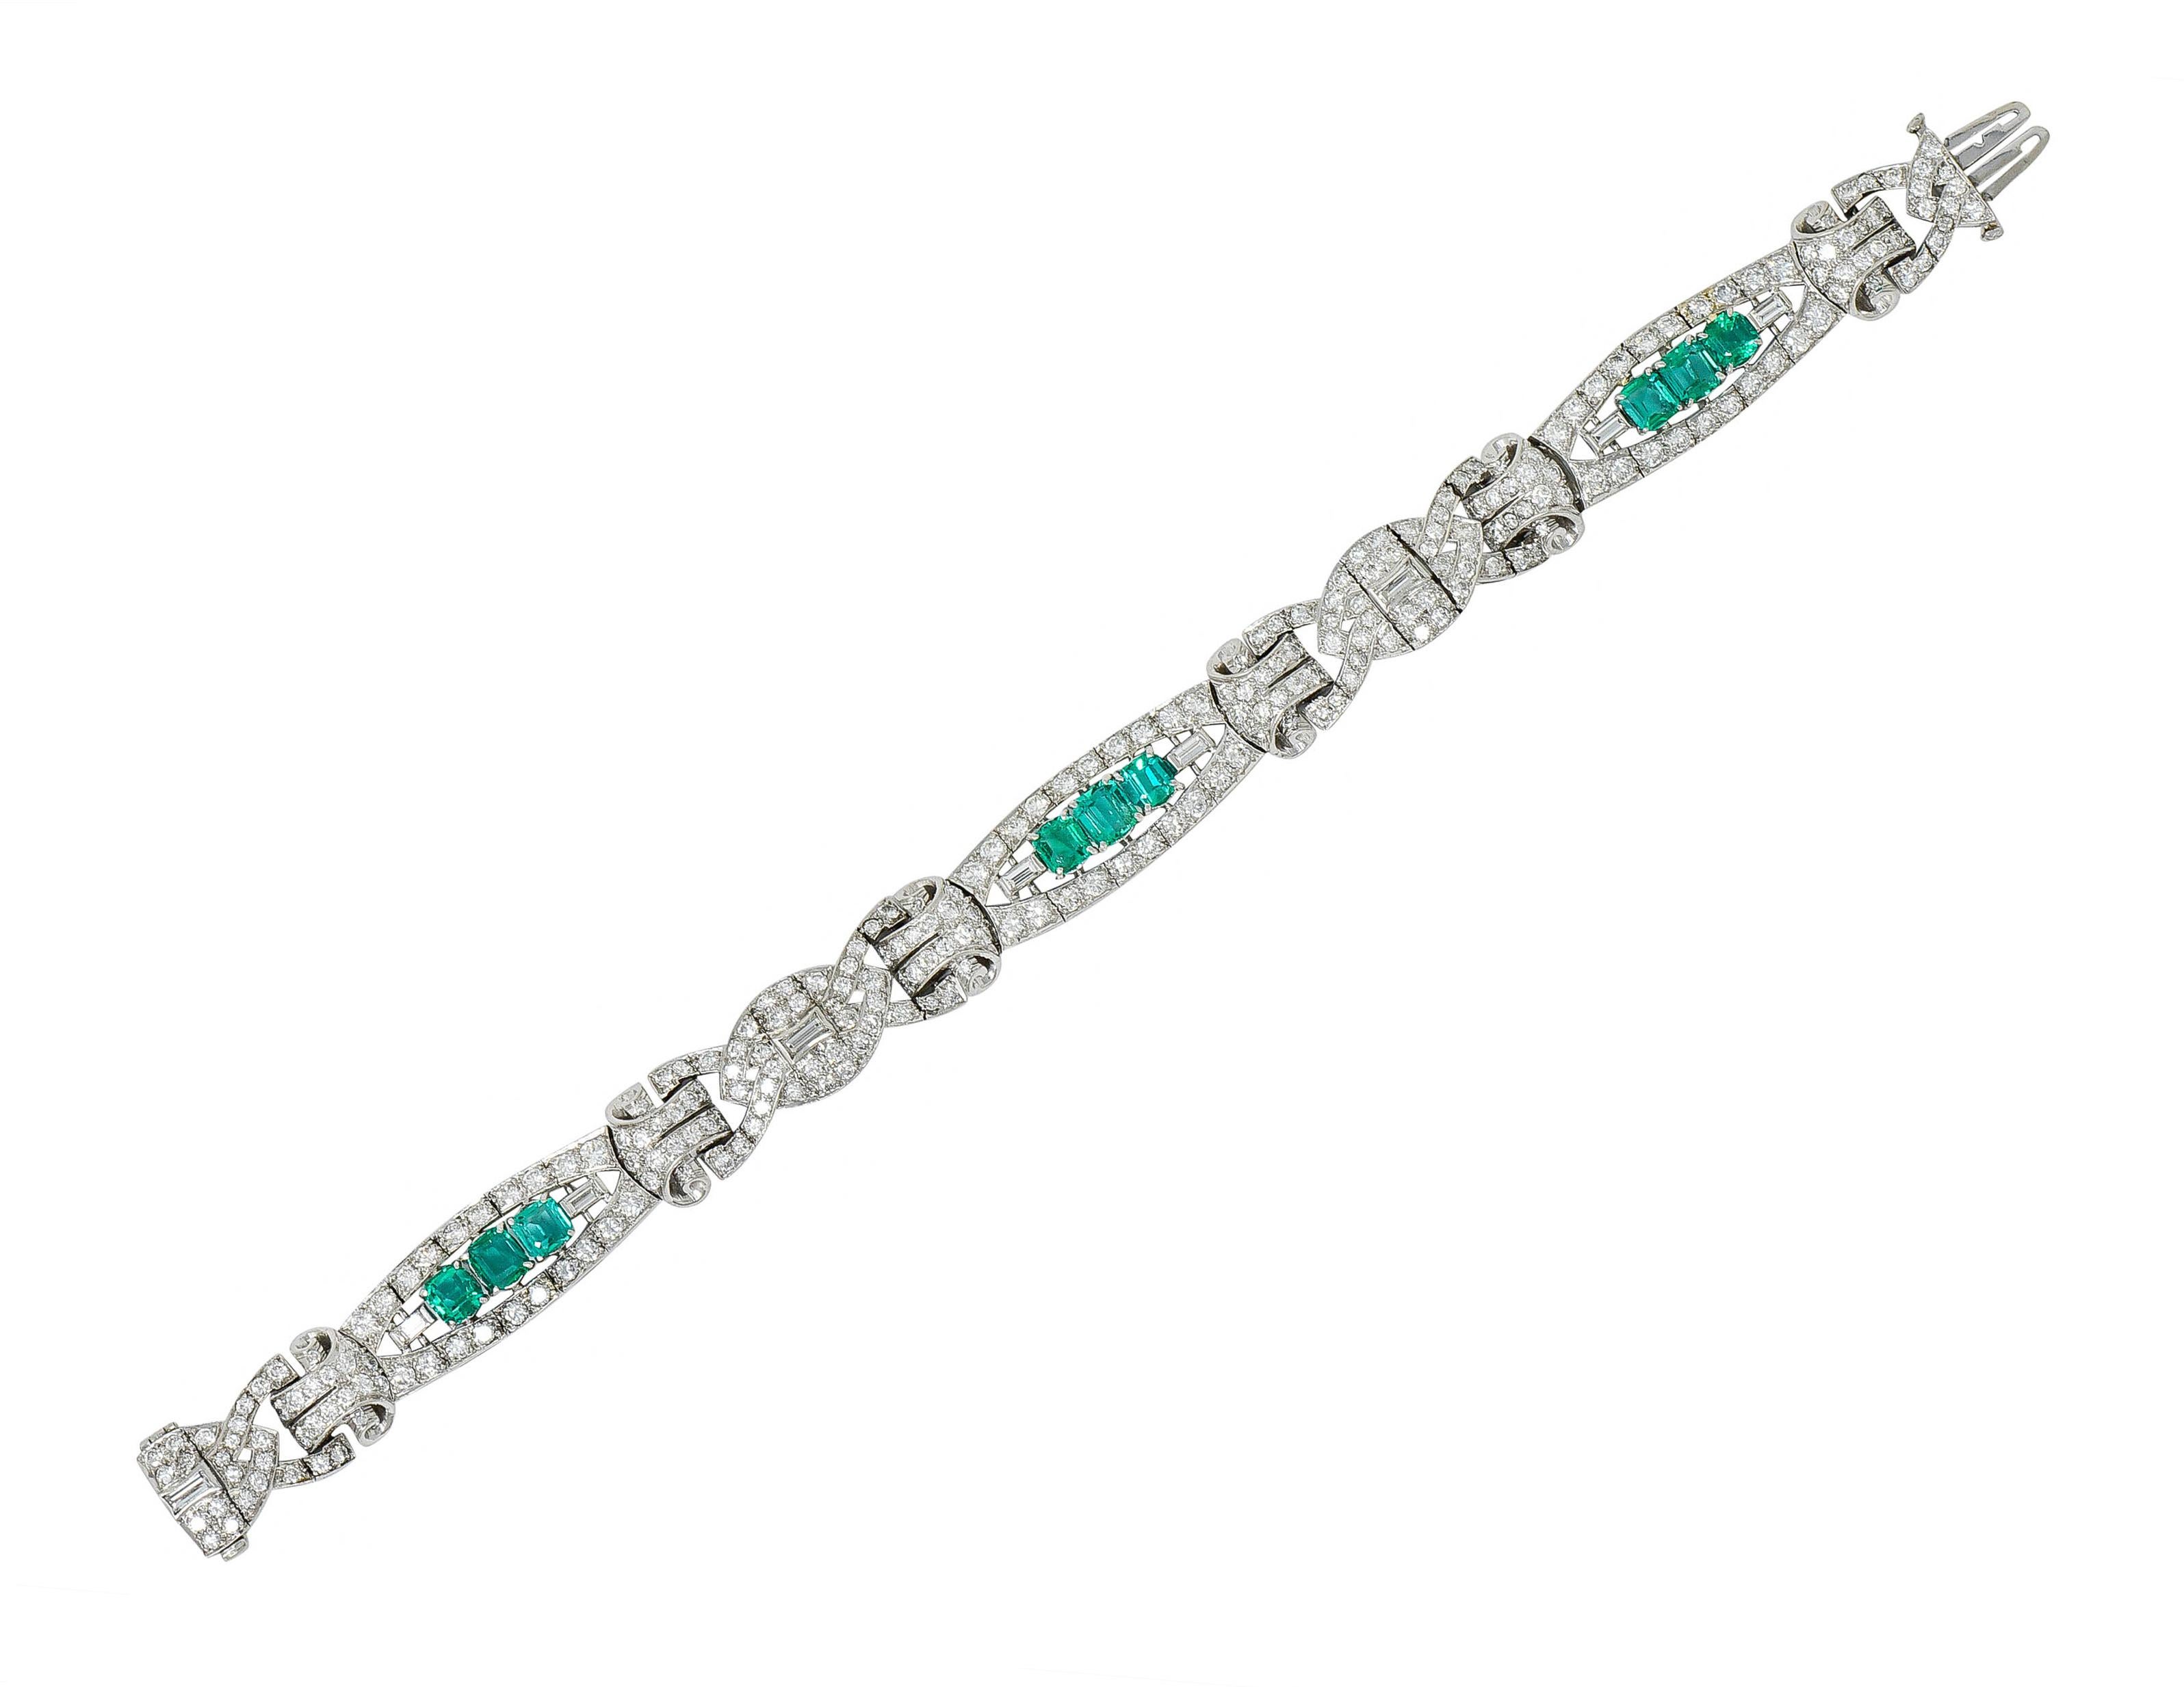 Bracelet is comprised of buckle and elongated links alternating with dynamically scrolled spacer links

Elongated links center triads of cushion and emerald cut emeralds weighing in total approximately 3.30 carats

Remarkably transparent and